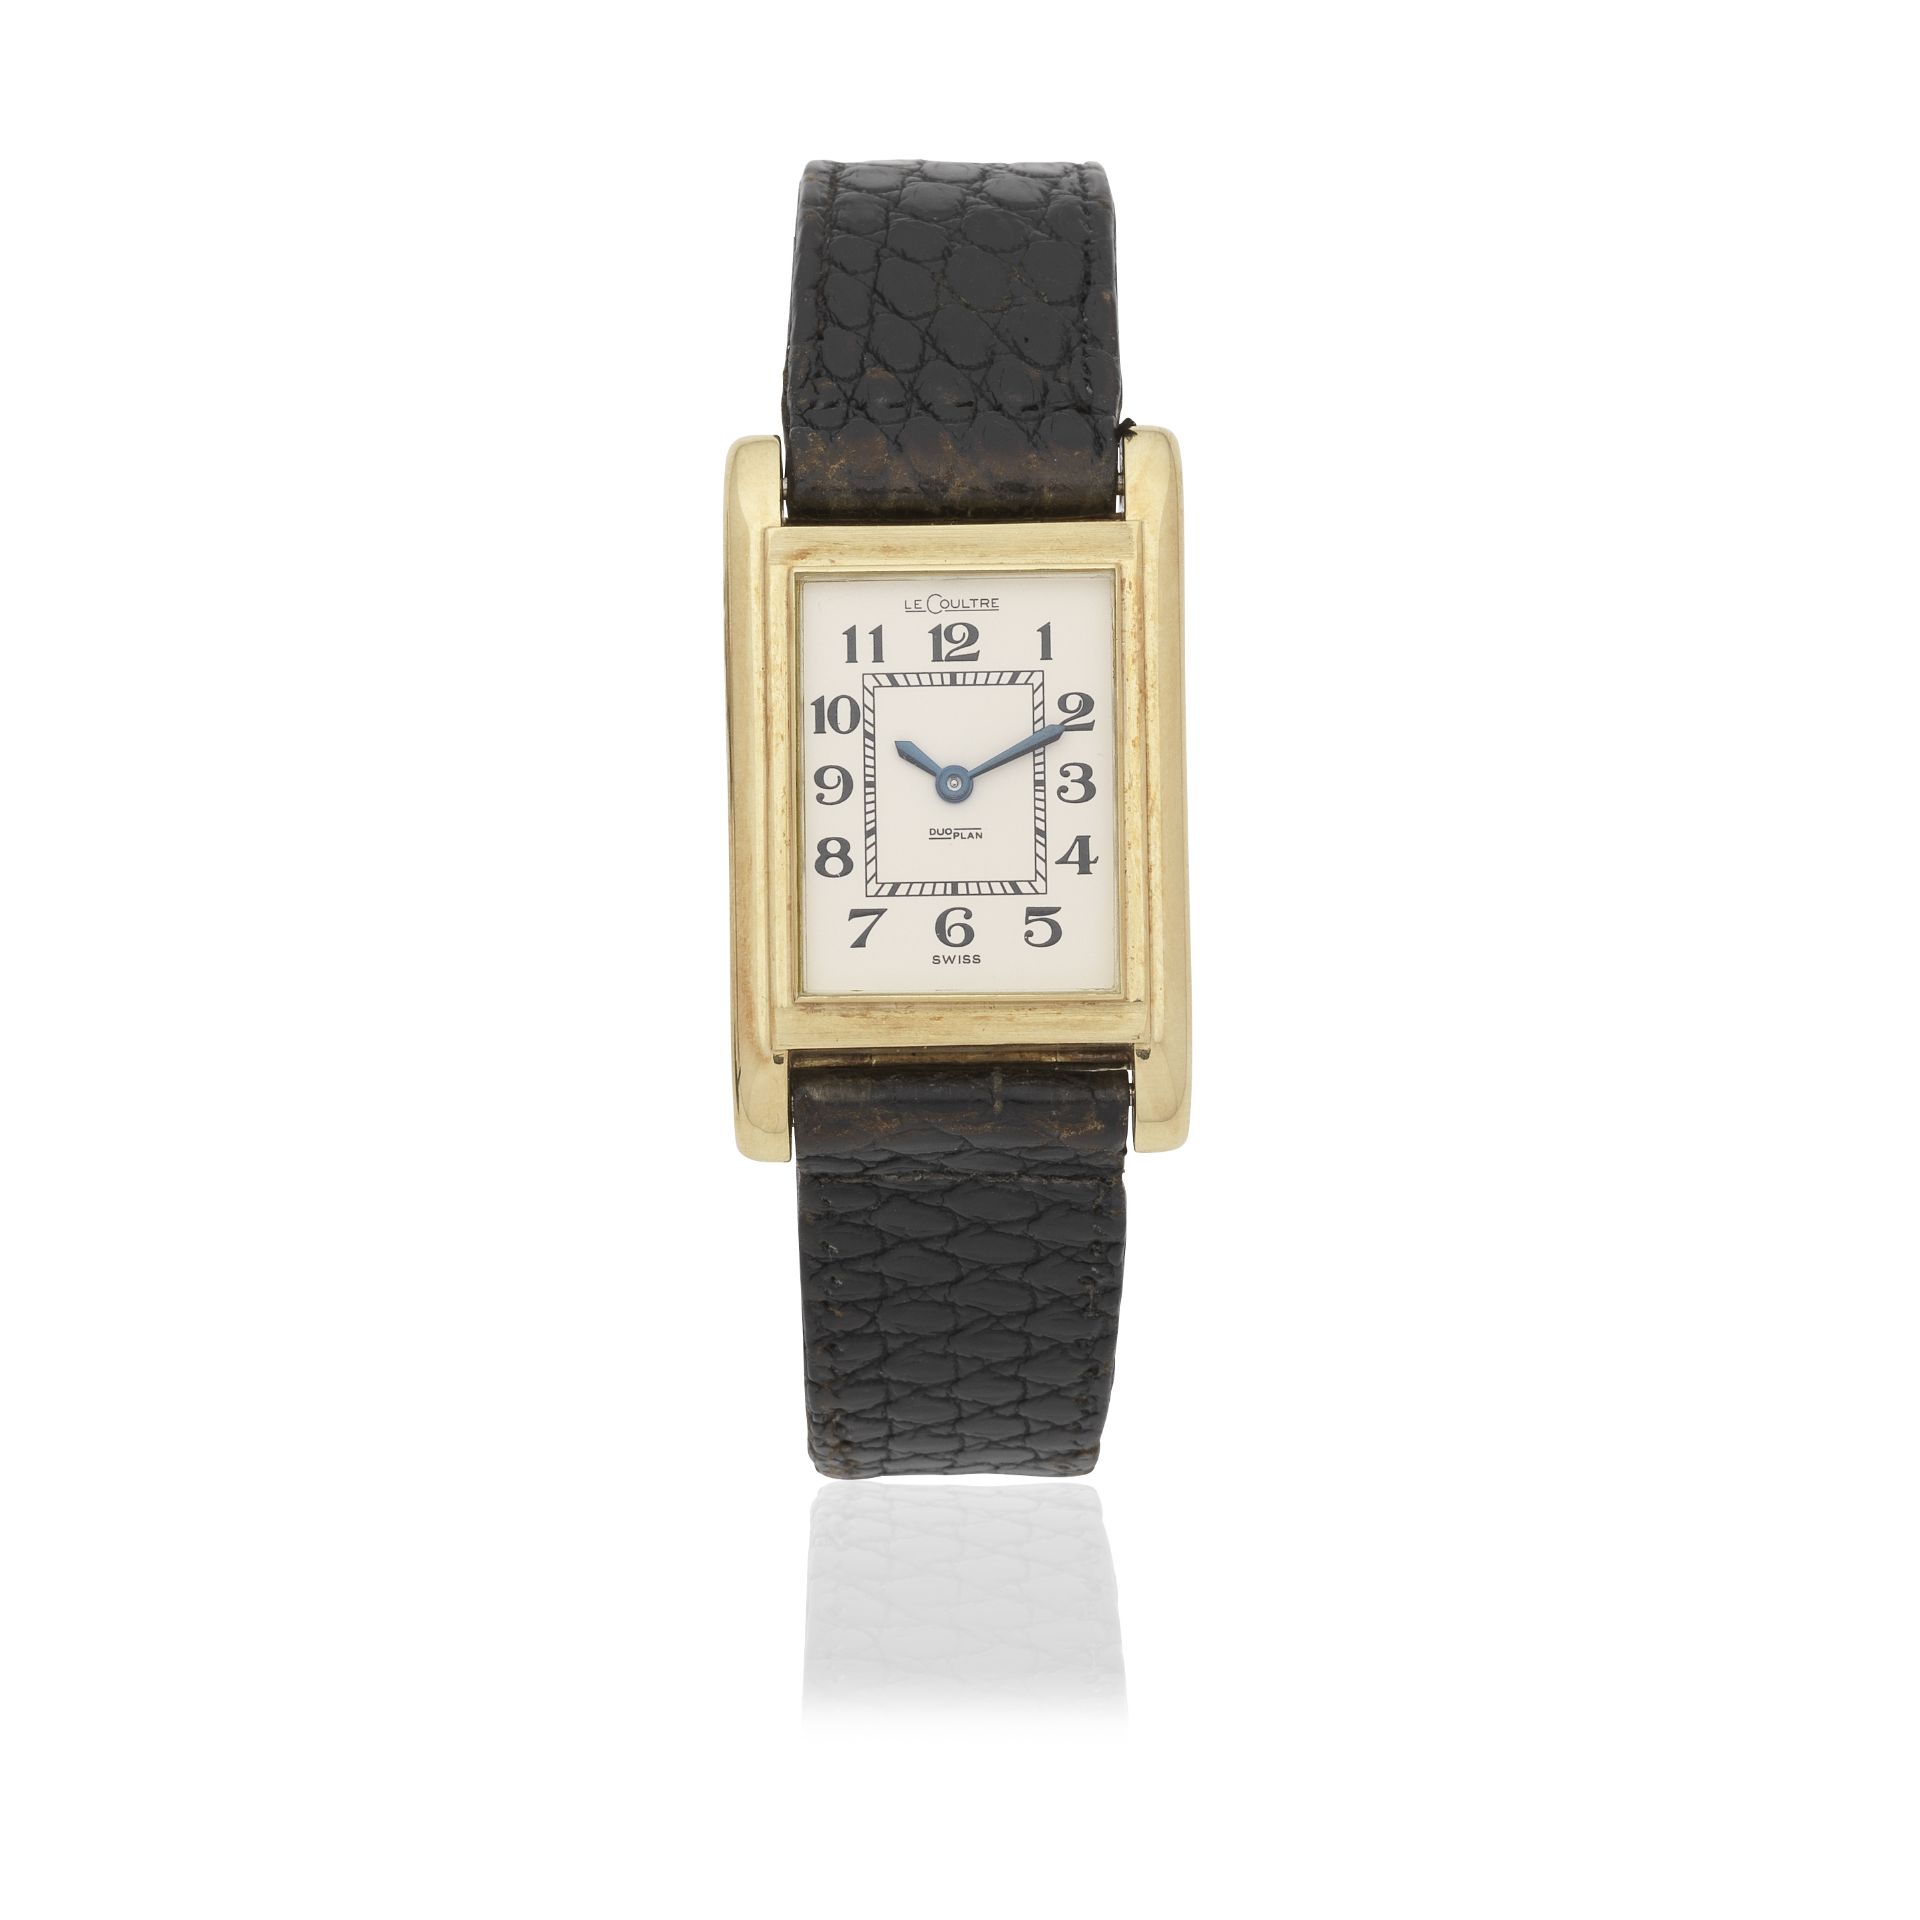 LeCoultre. An 18K gold manual wind rectangular form wristwatch Duoplan, London Import mark for ...